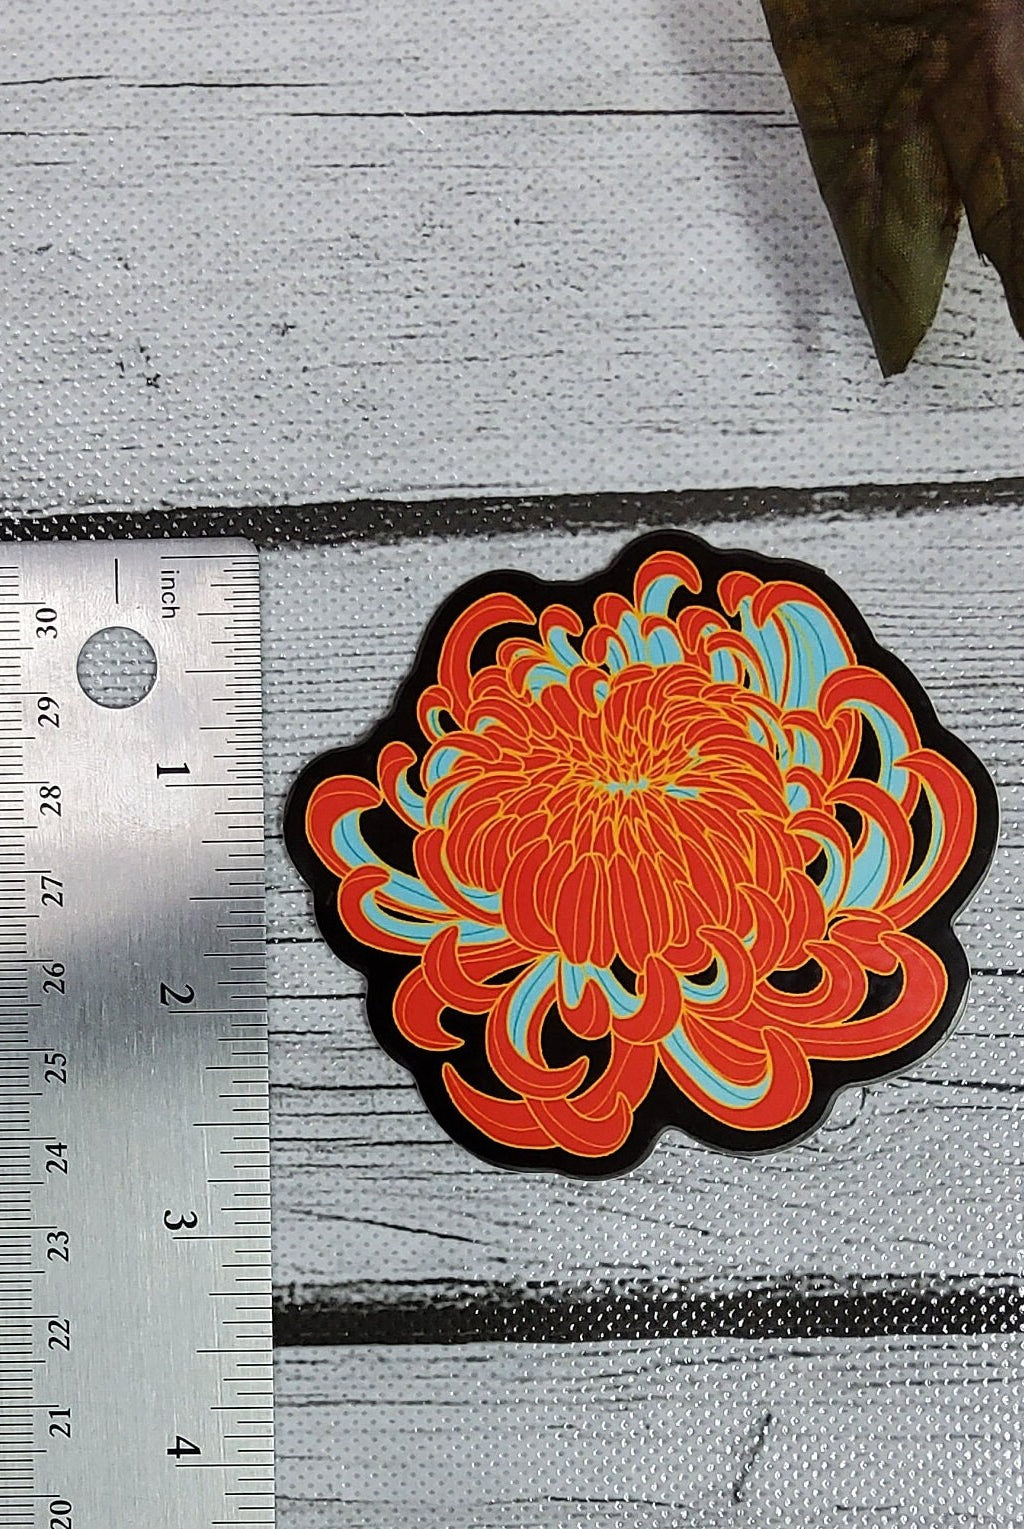 GLOSSY STICKER: STYLE 3 Orange and Teal Chrysanthemum , Chrysanthemum Sticker , Chrysanthemum Art , Floral Sticker , Floral Art Sticker